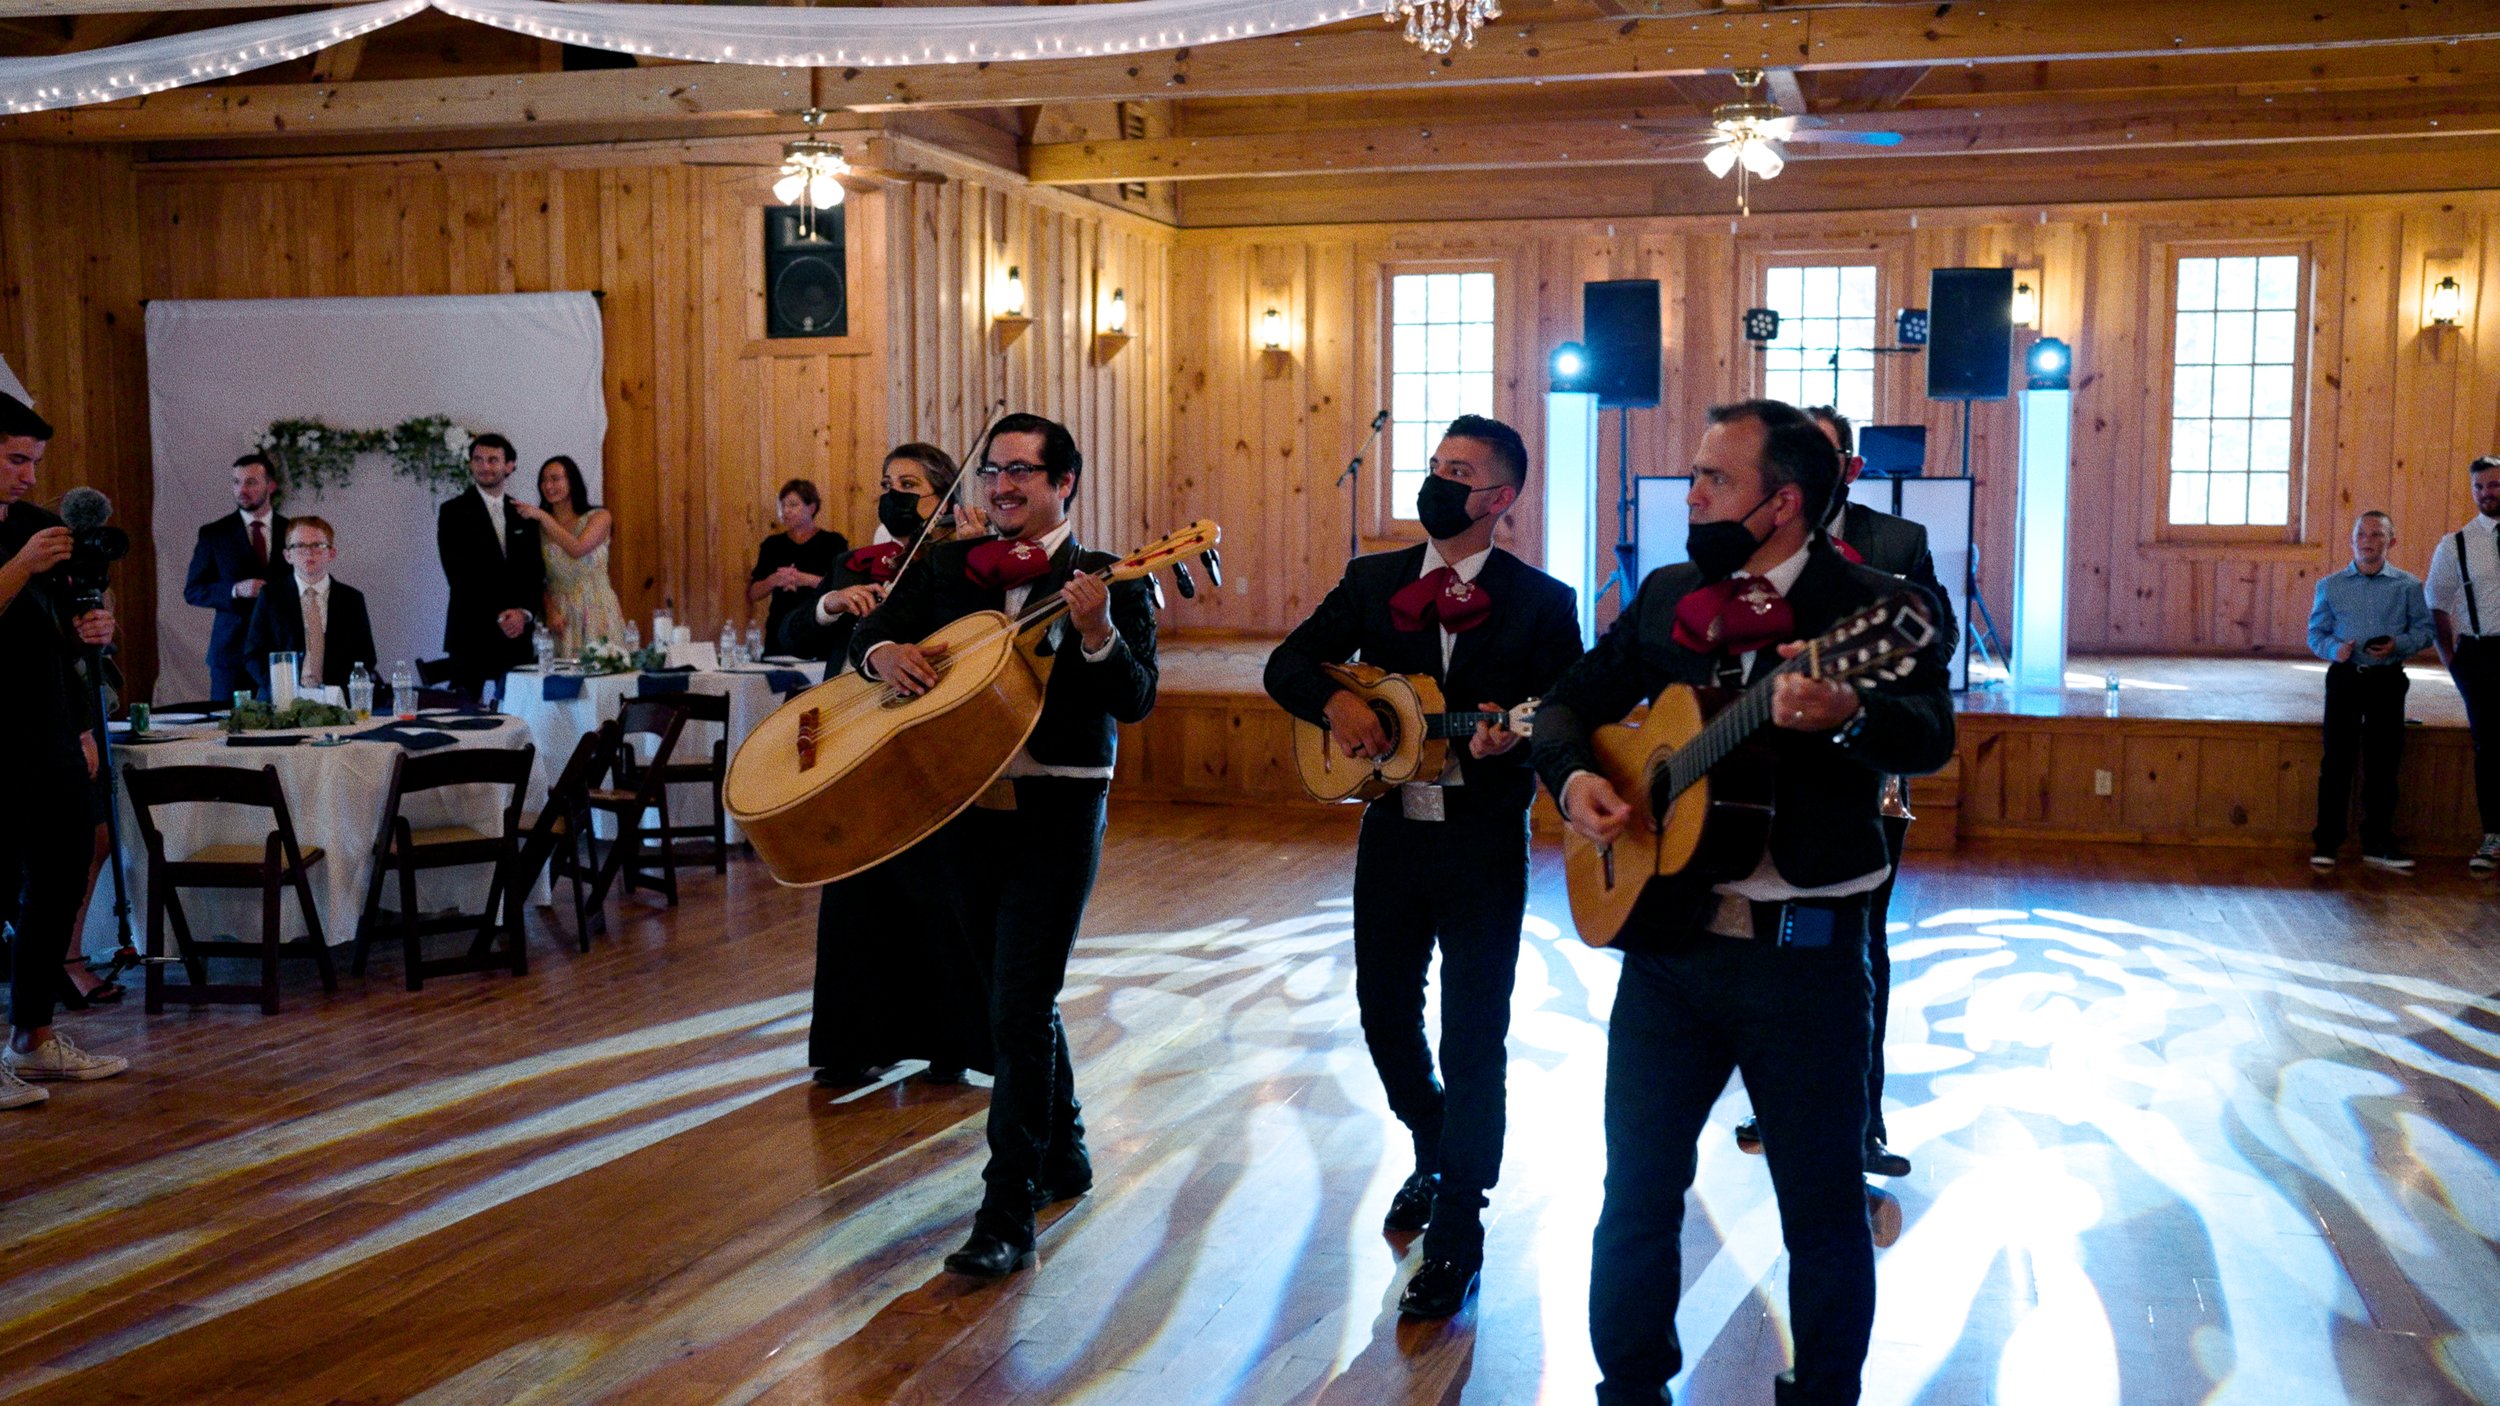 mariachi band playing at dinner inside reception